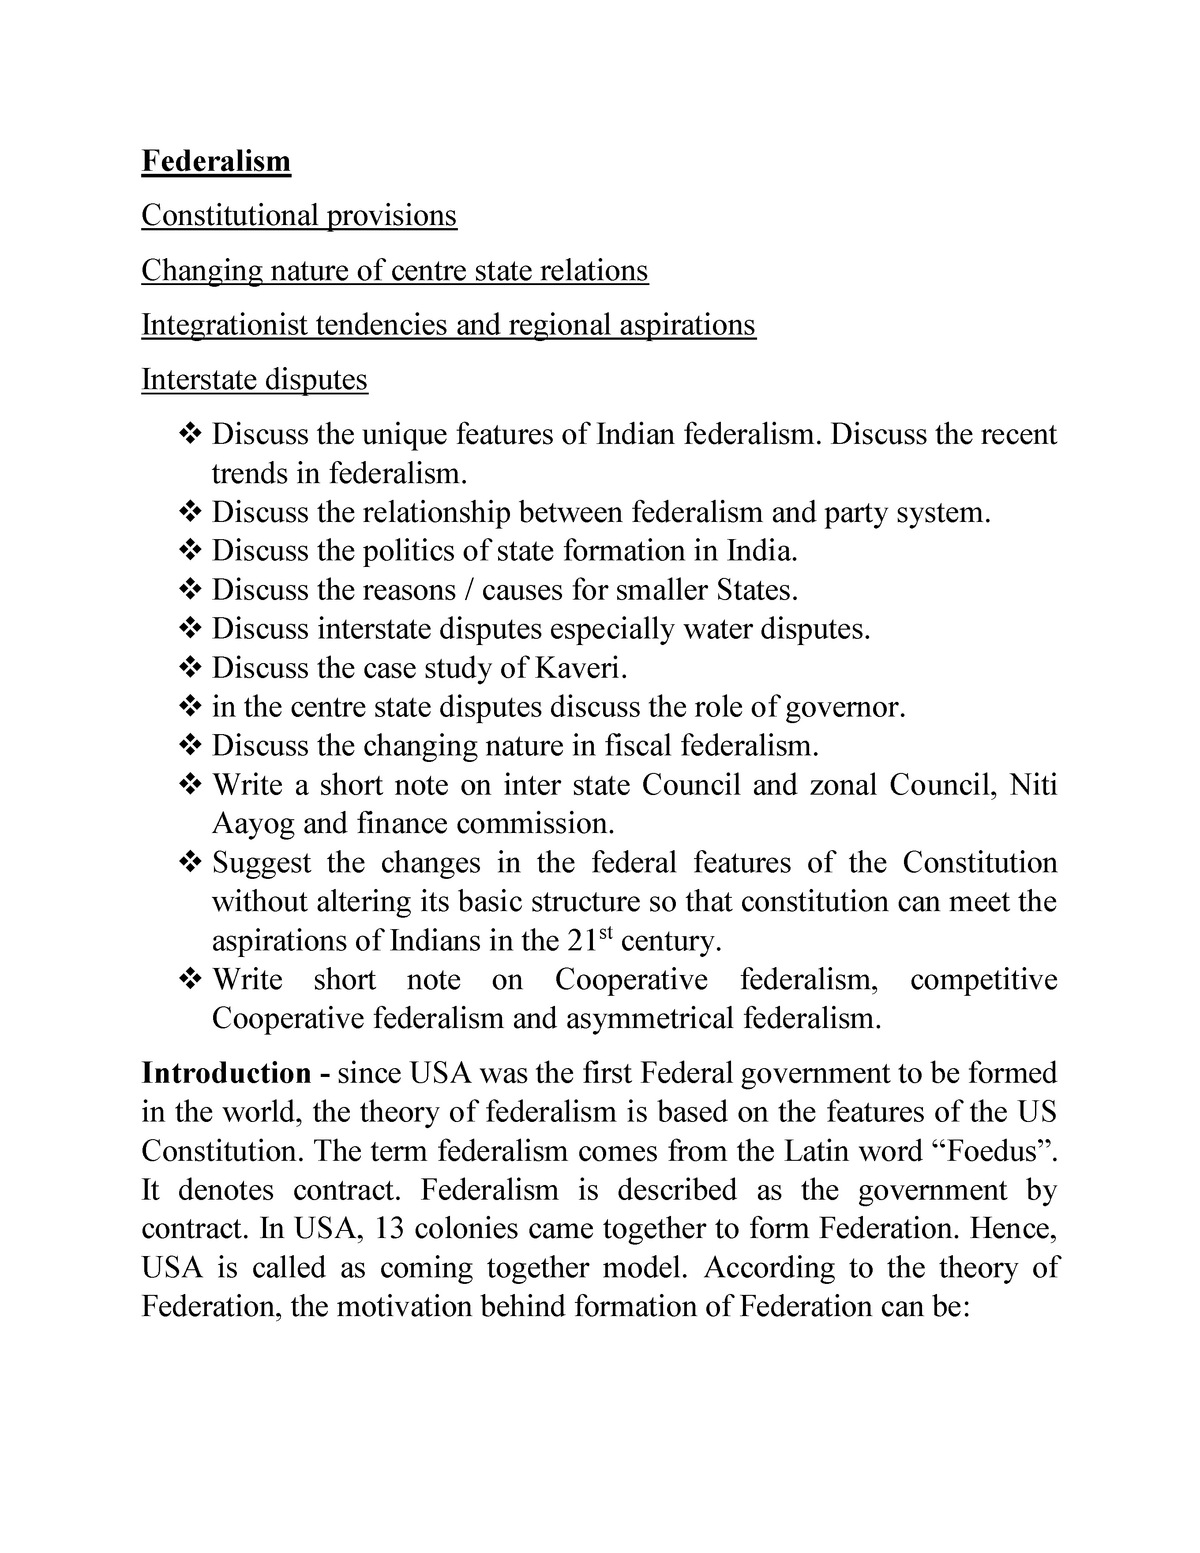 write an essay on indian federalism